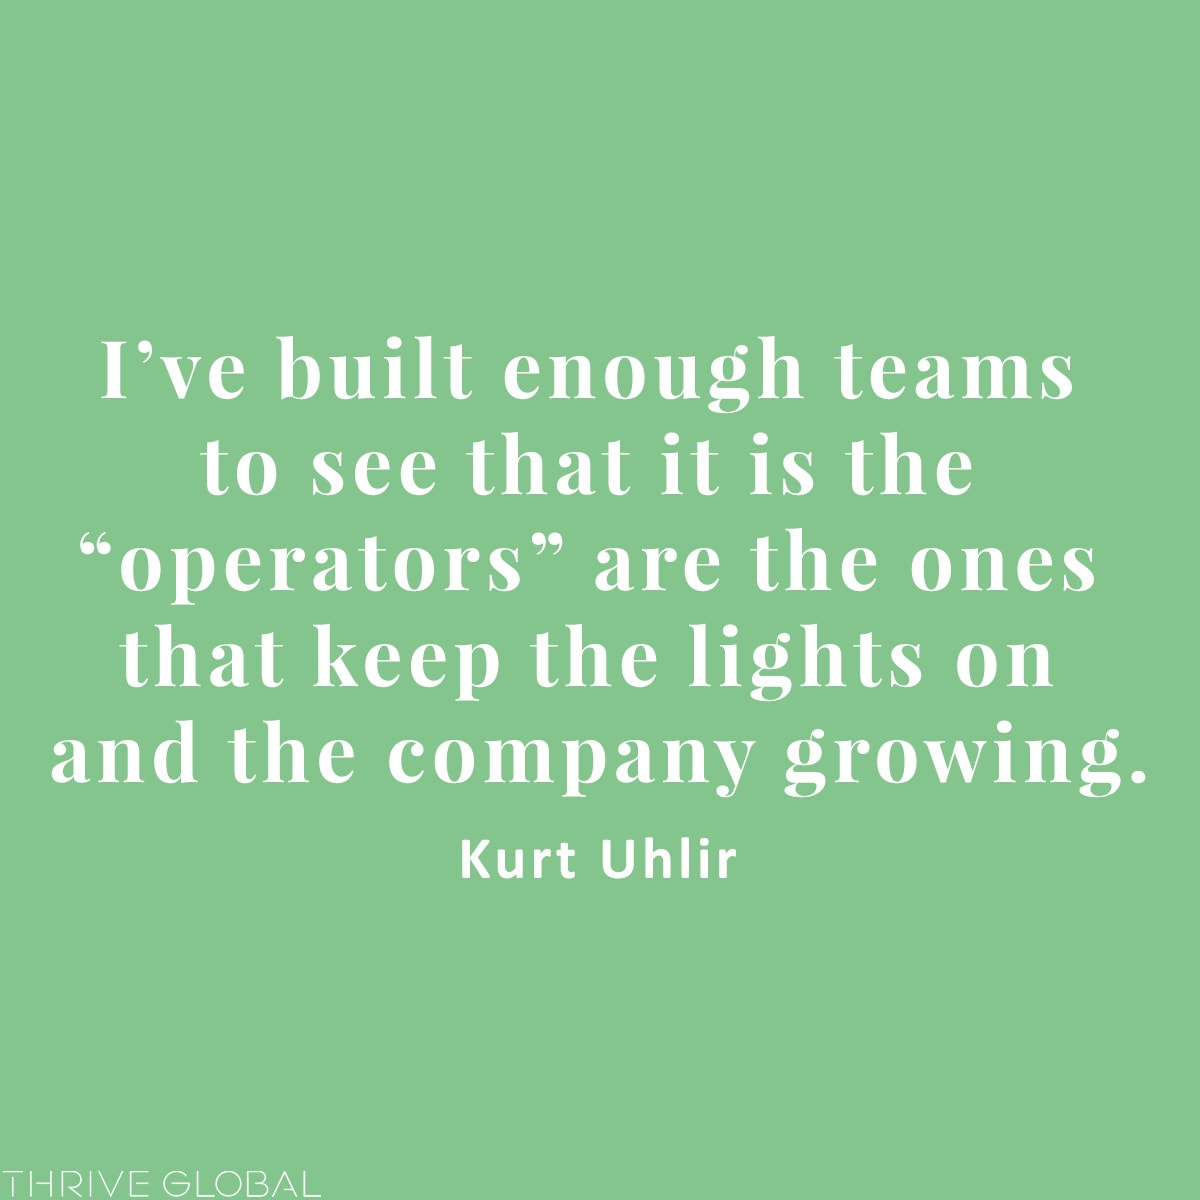 I’ve built enough teams to see that it is the “operators” are the ones that keep the lights on and the company growing.